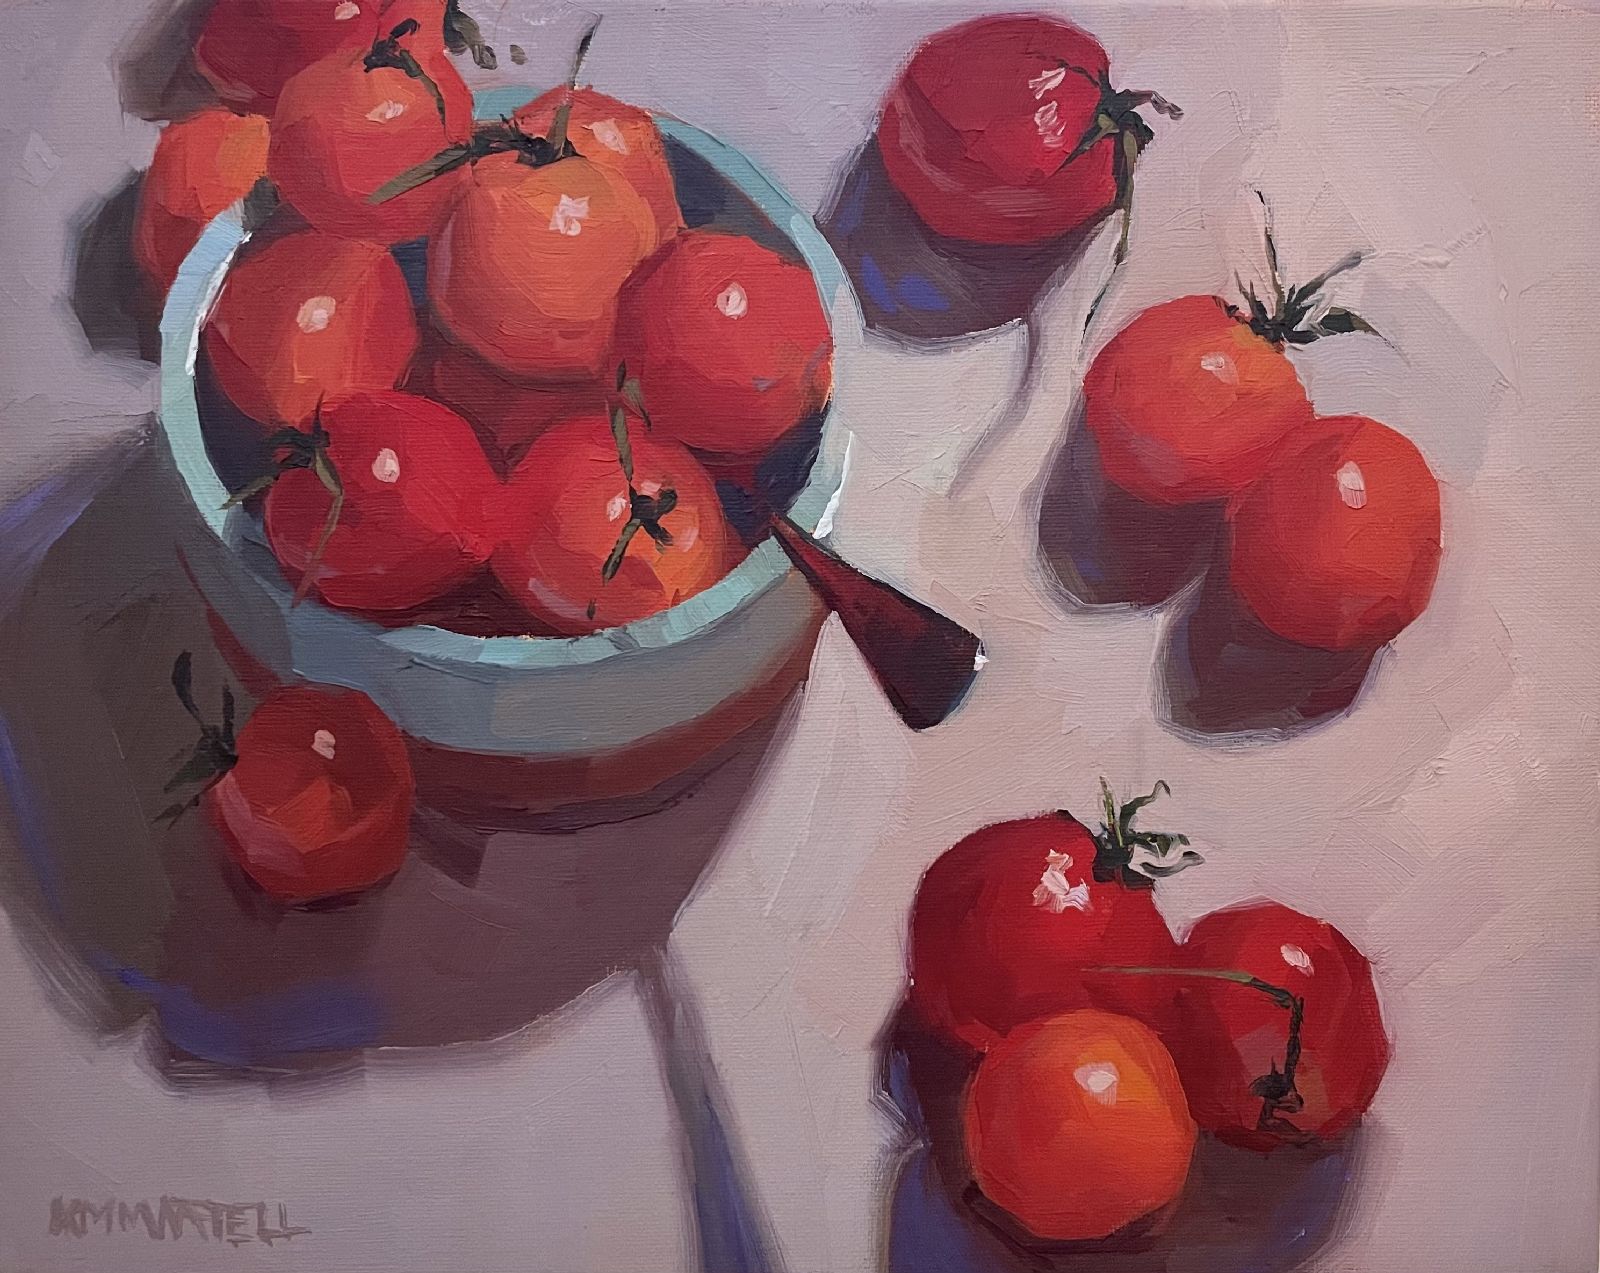 Spoonful of Tomatoes by Kayla Martell